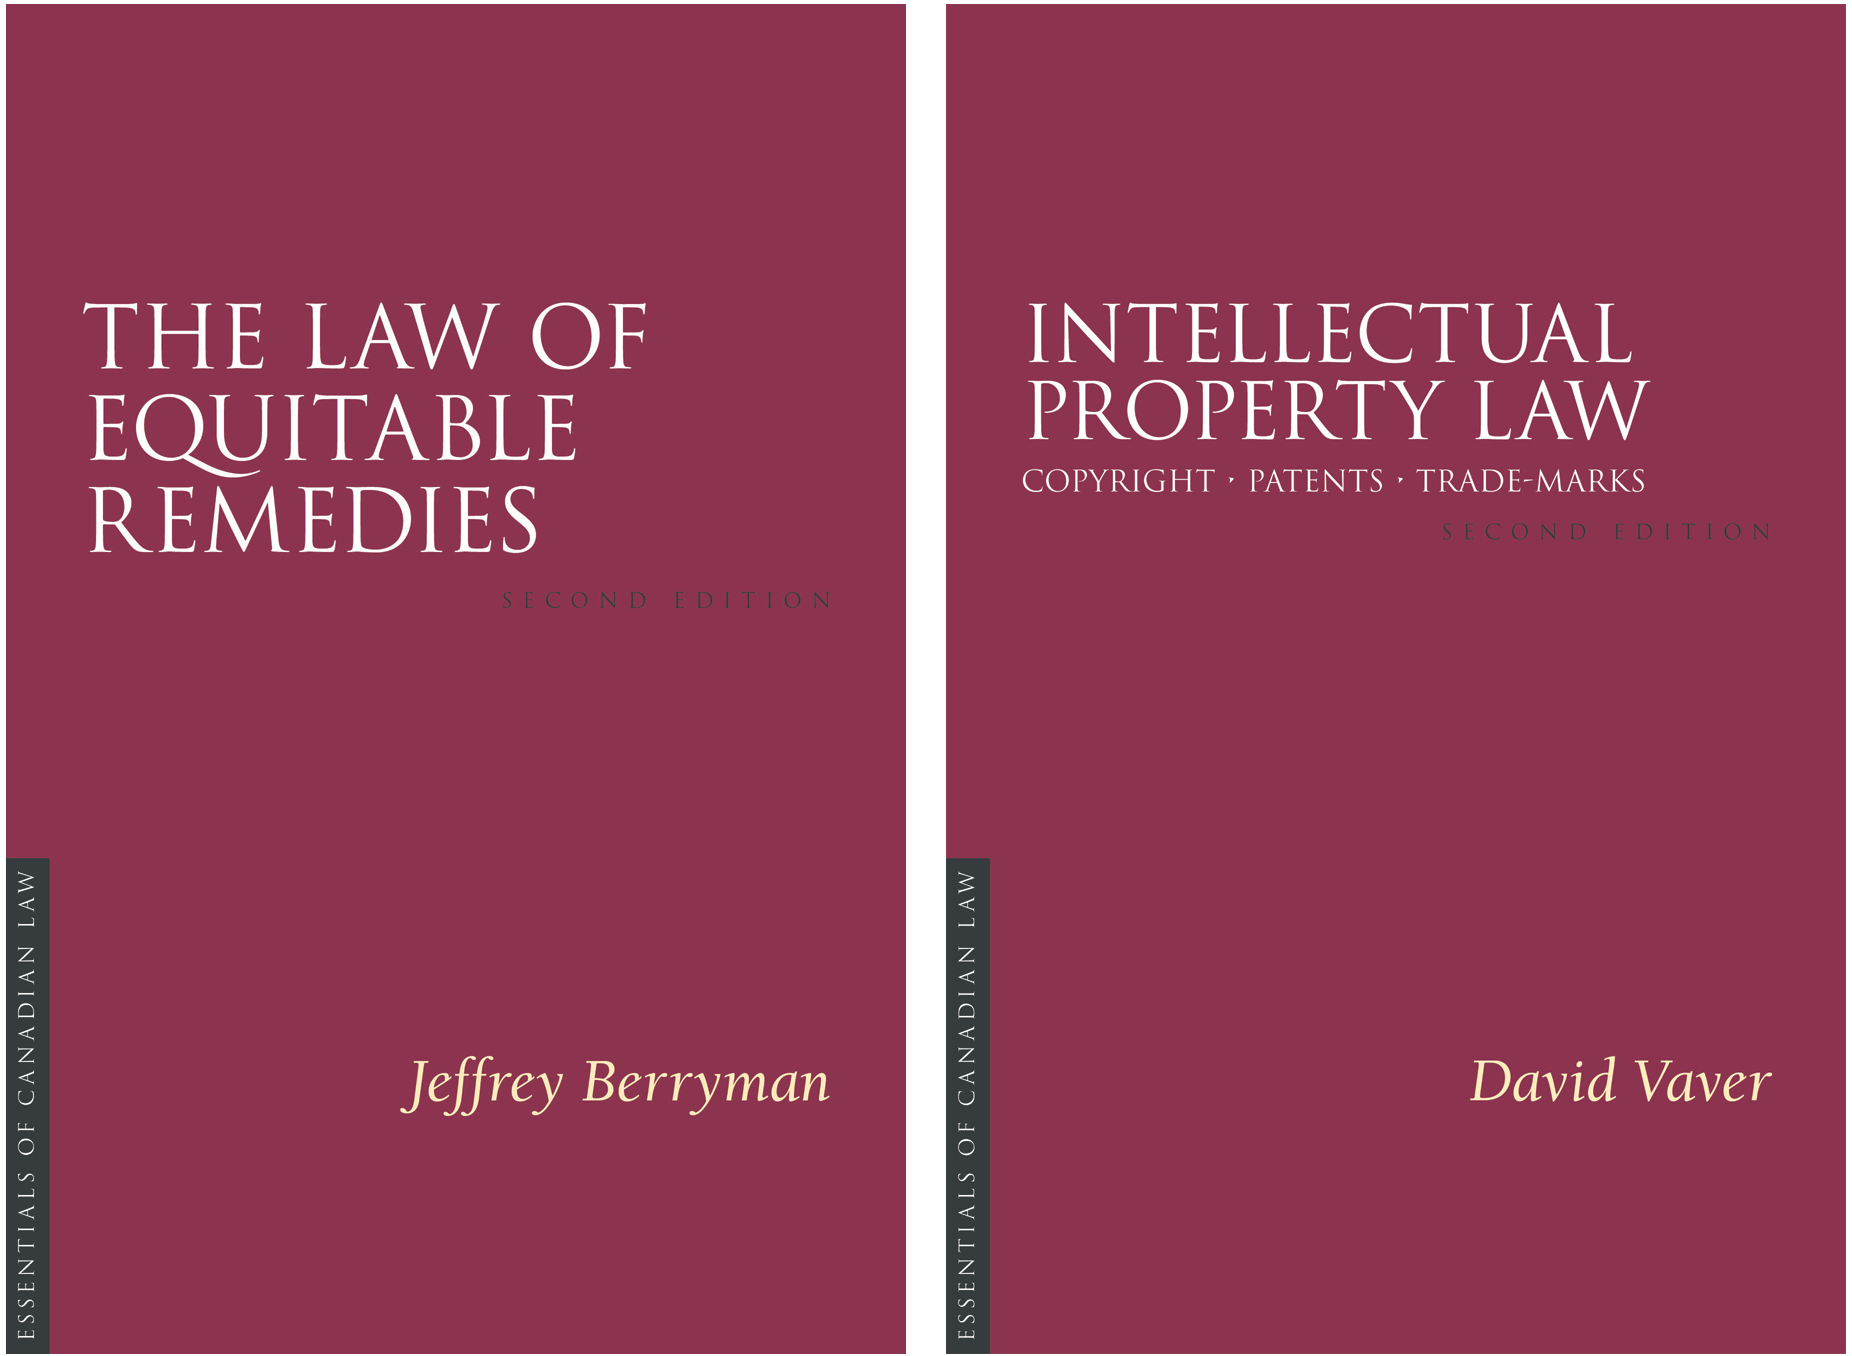 Book covers for Law of Equitable Remedies by Jeffrey Berryman and Intellectual Property Law by David Vaver.